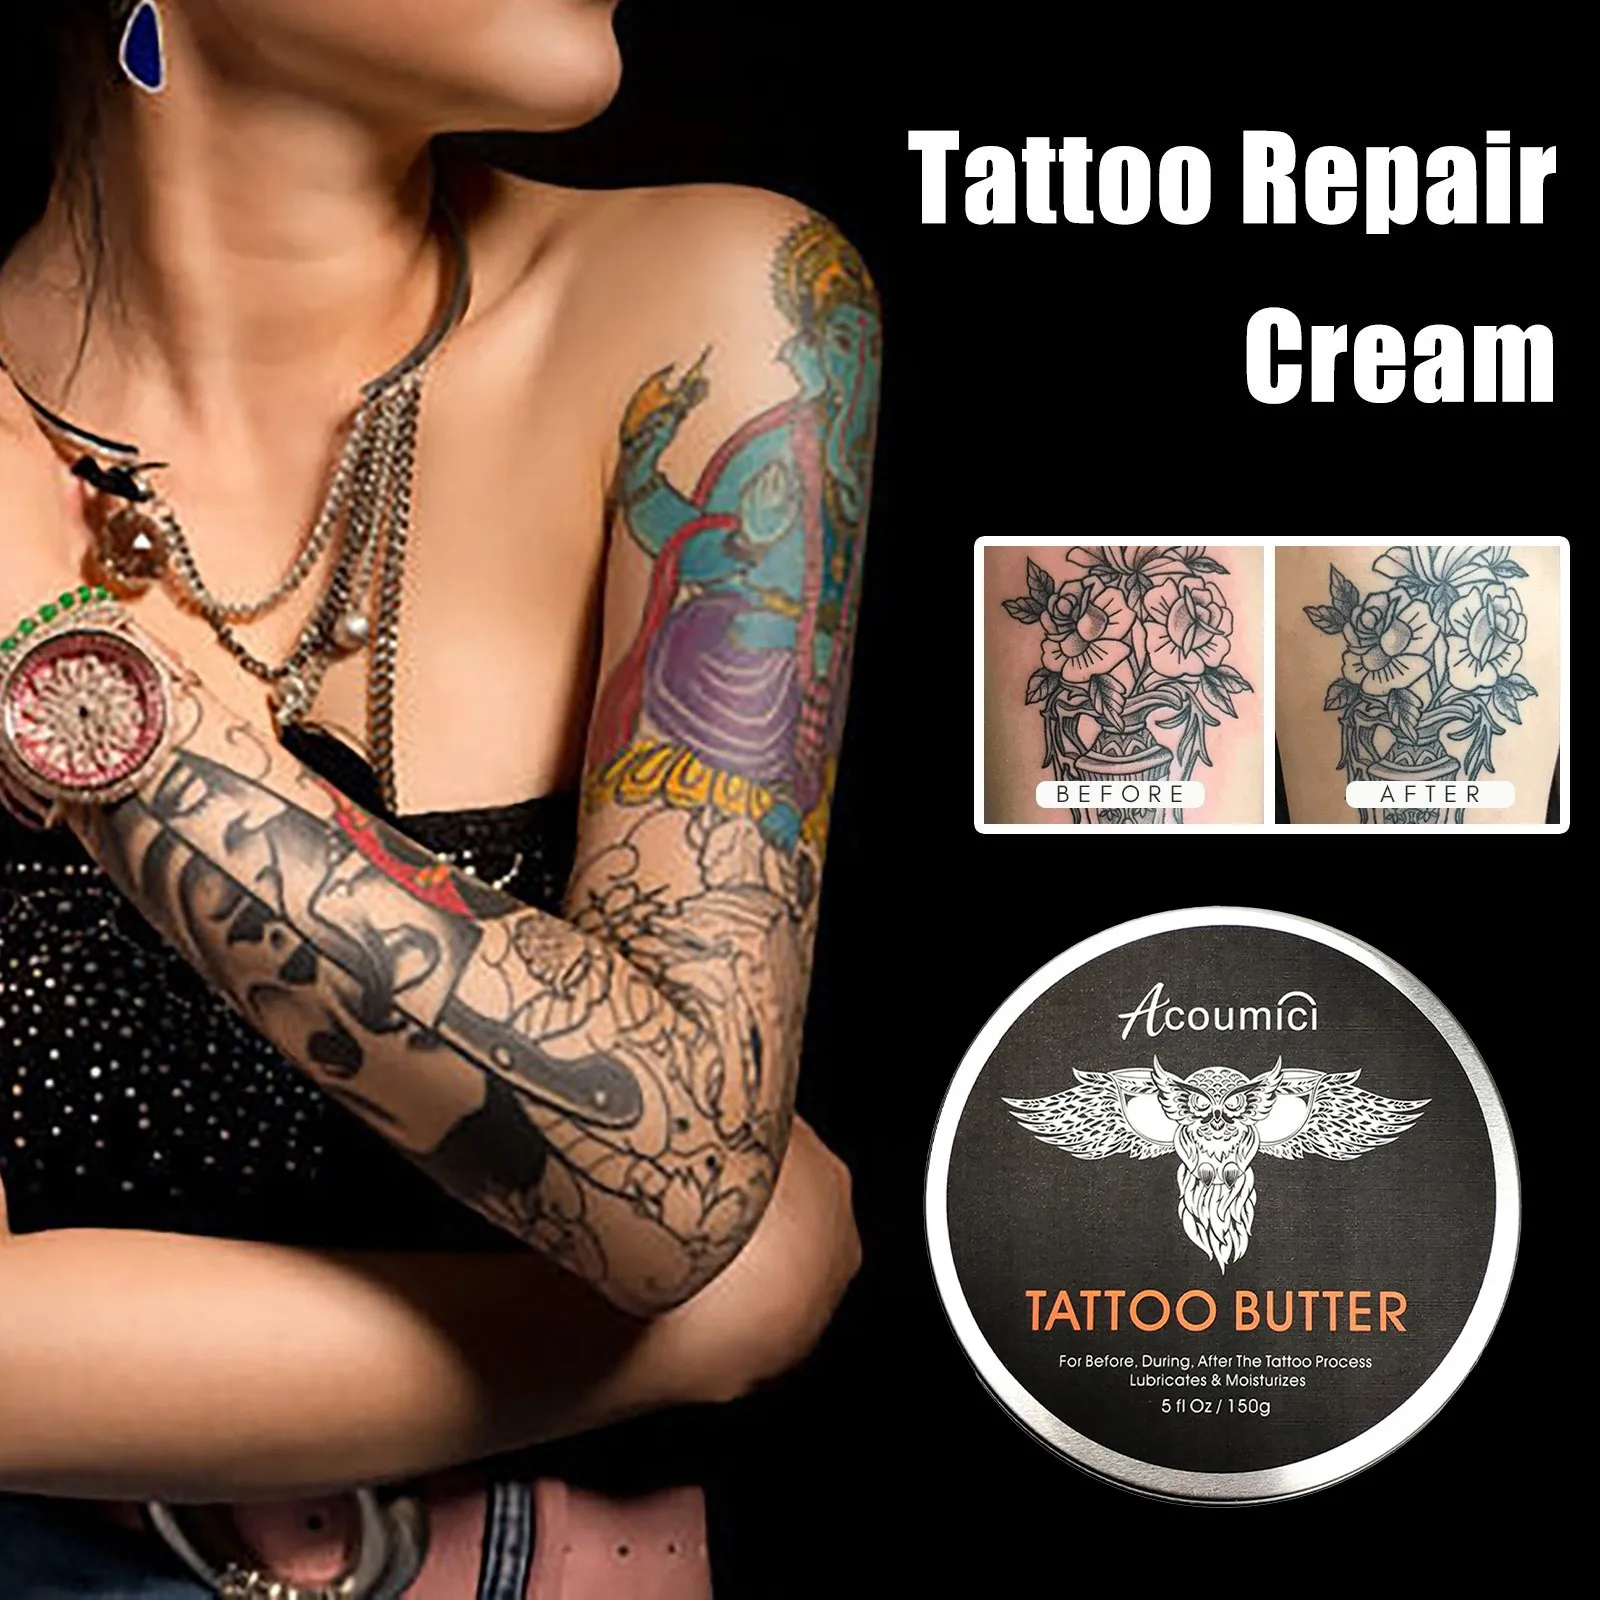 Samnyte Tattoo Balm 353Oz Tattoo Brightener  Refresh Old Tattoos Tattoo  Cream Stick for Color Enhancement  Moisturizing Promotes Healing   Soothing Natural tattoo aftercare butter Lotion  Beauty  Personal Care   Amazoncom